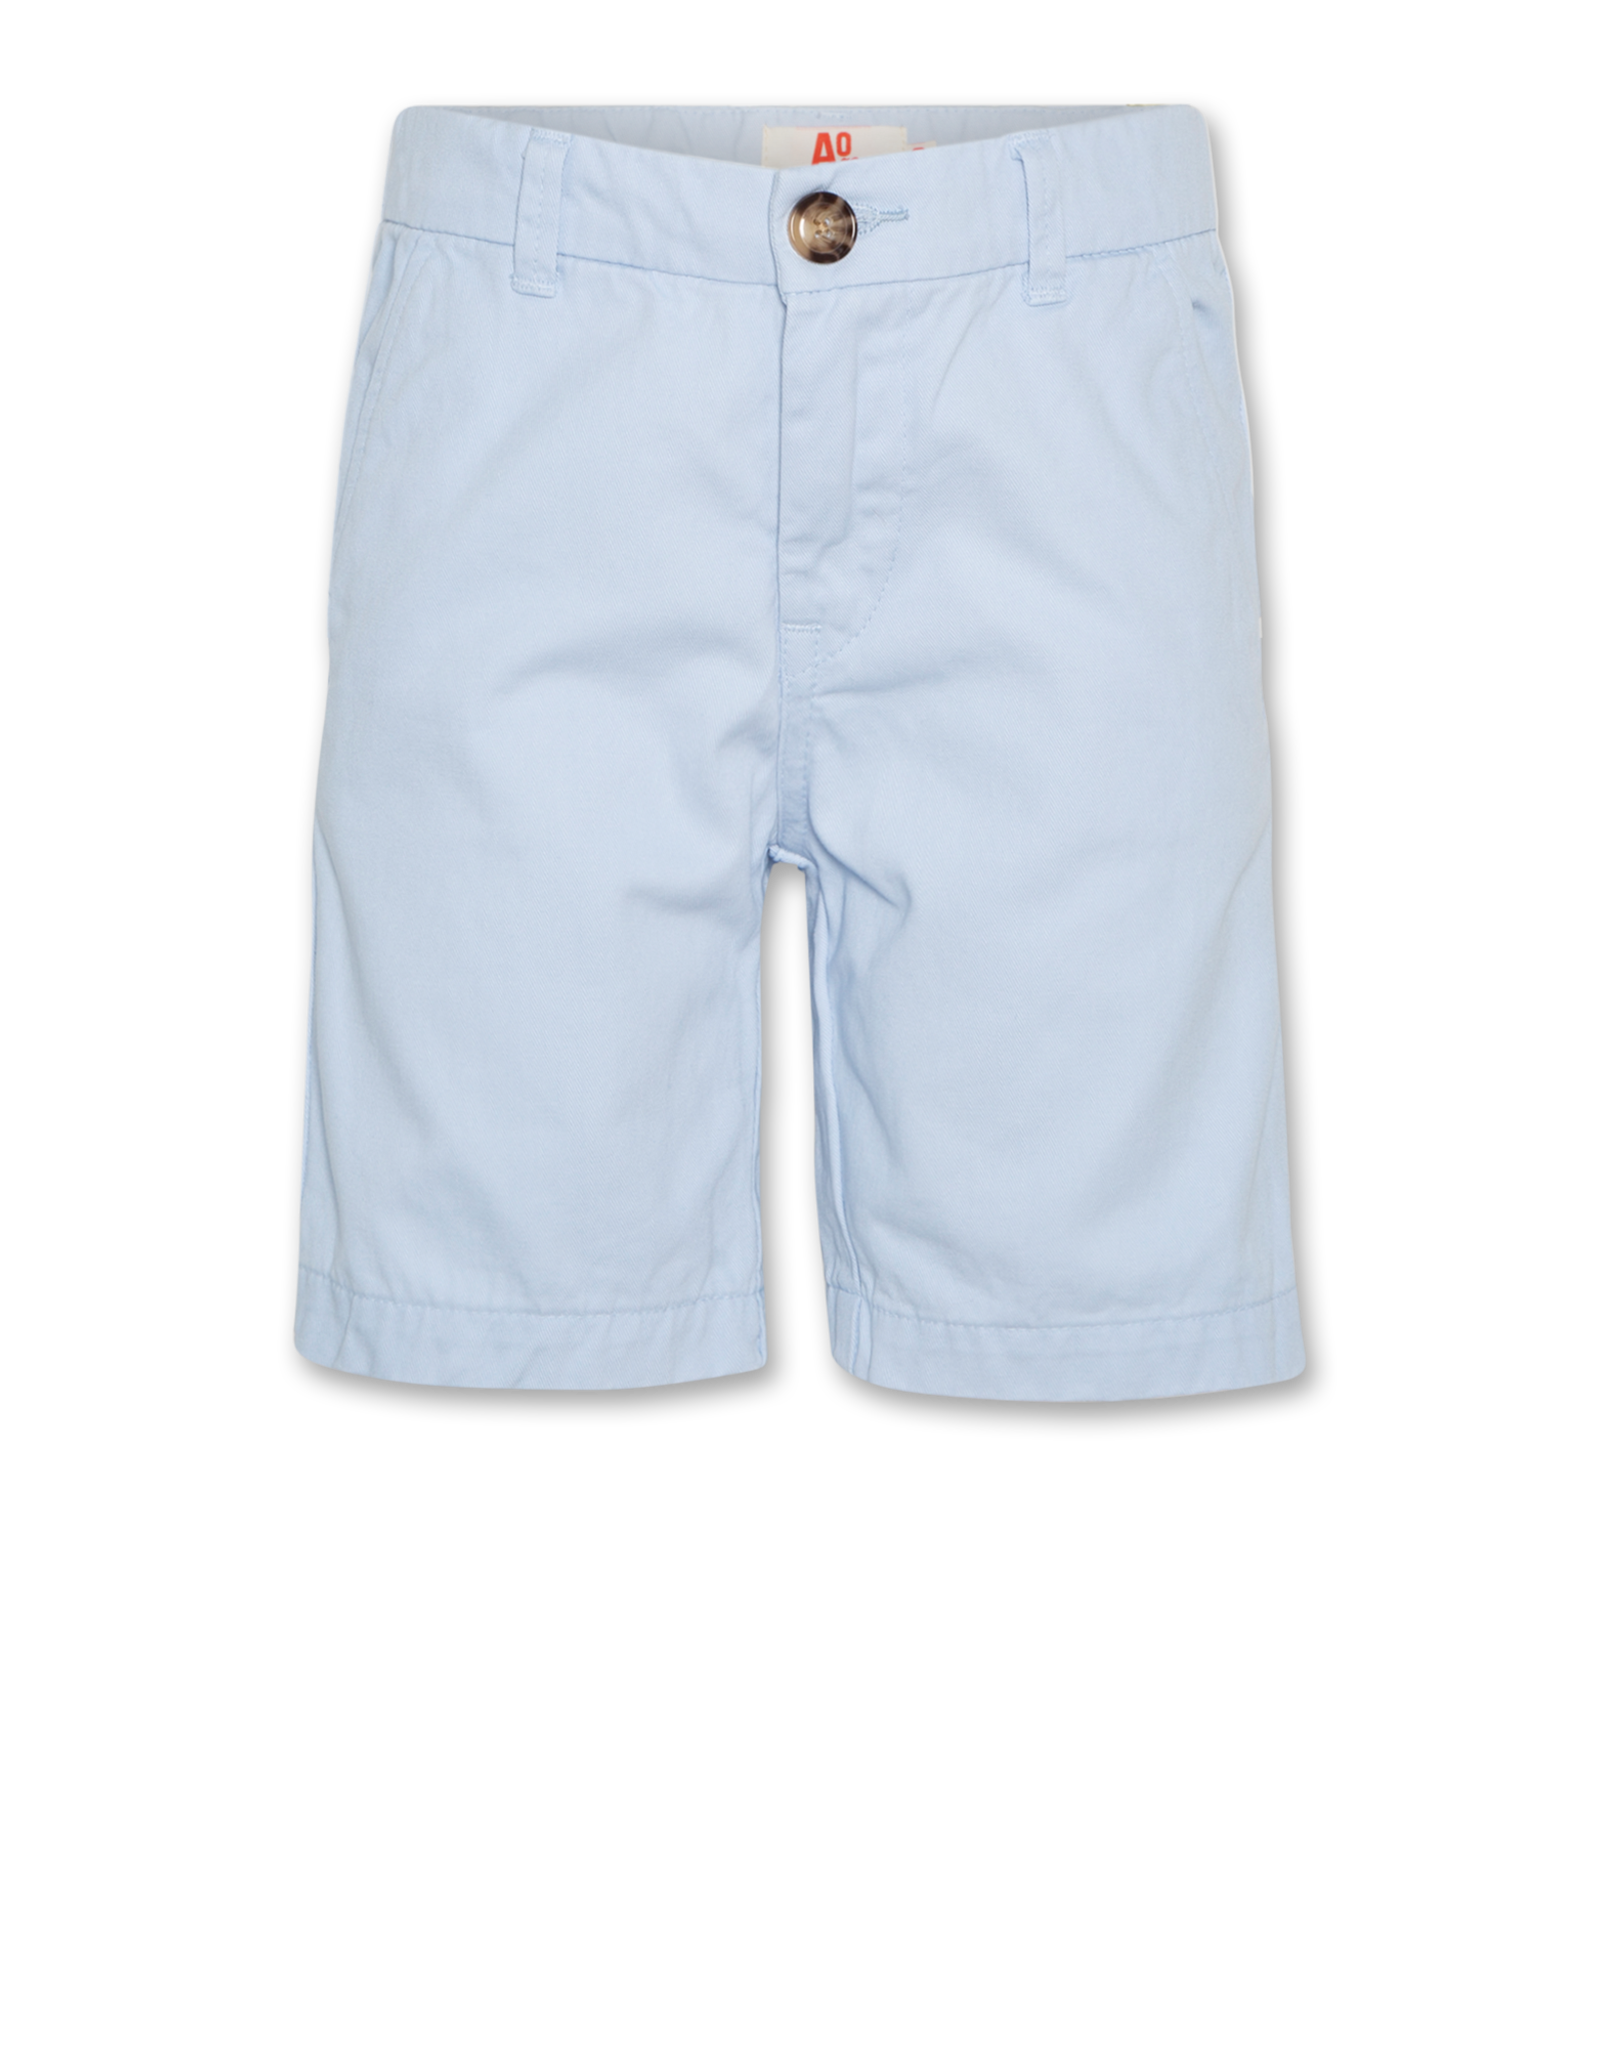 AMERICAN OUTFITTERS Ao76 Barry chino shorts blue